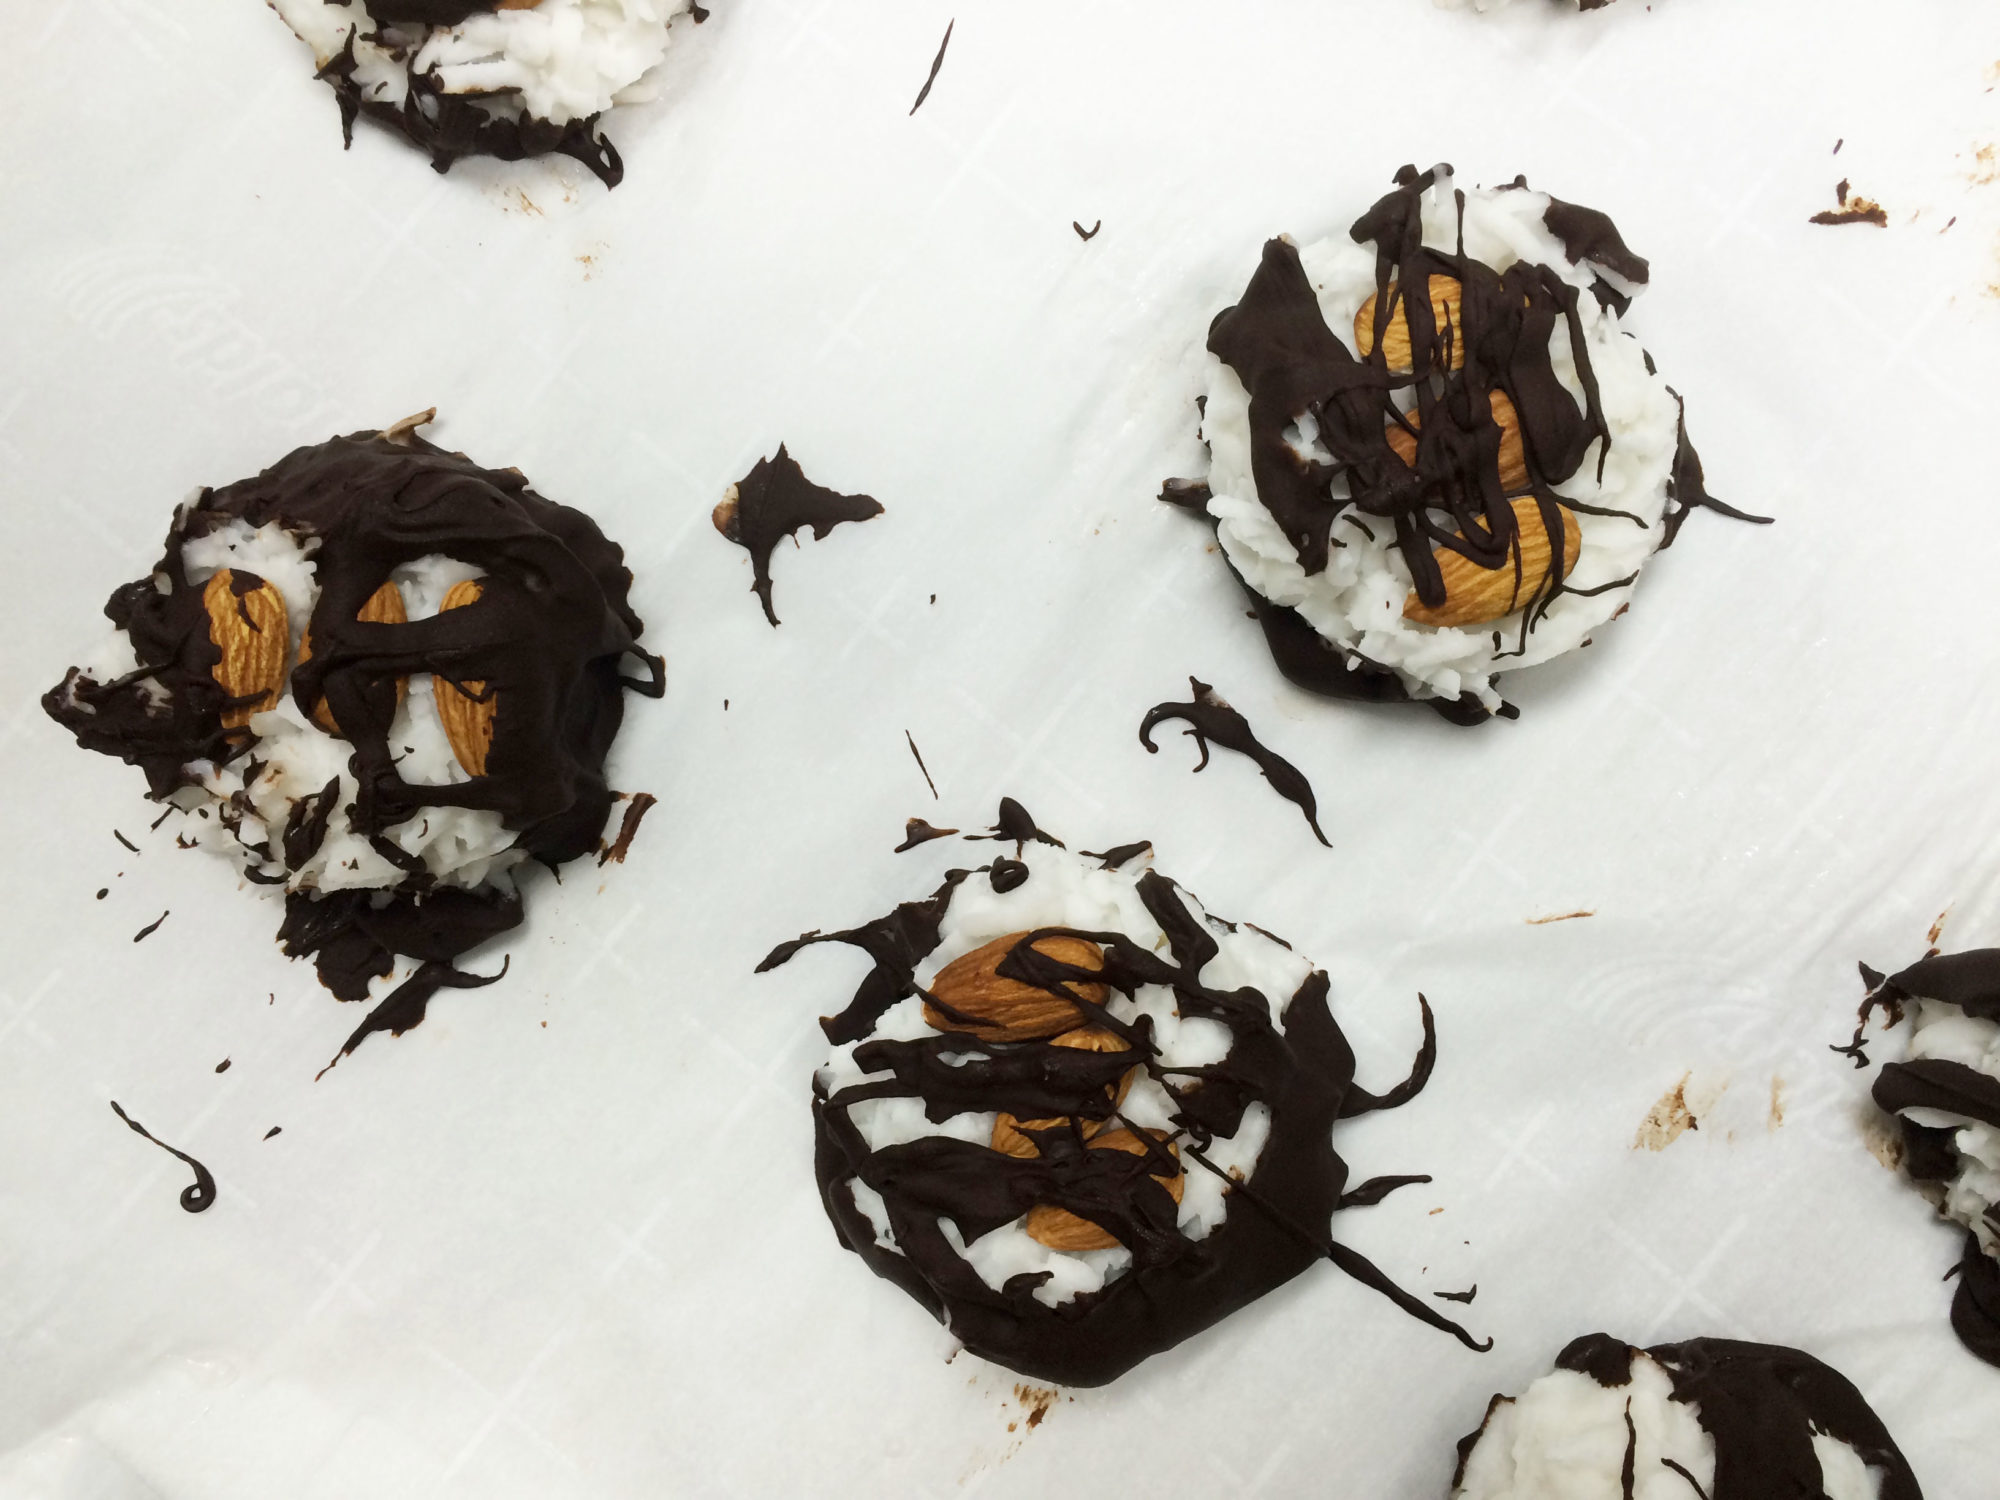 4-Ingredient Chocolate Covered Coconut Patties